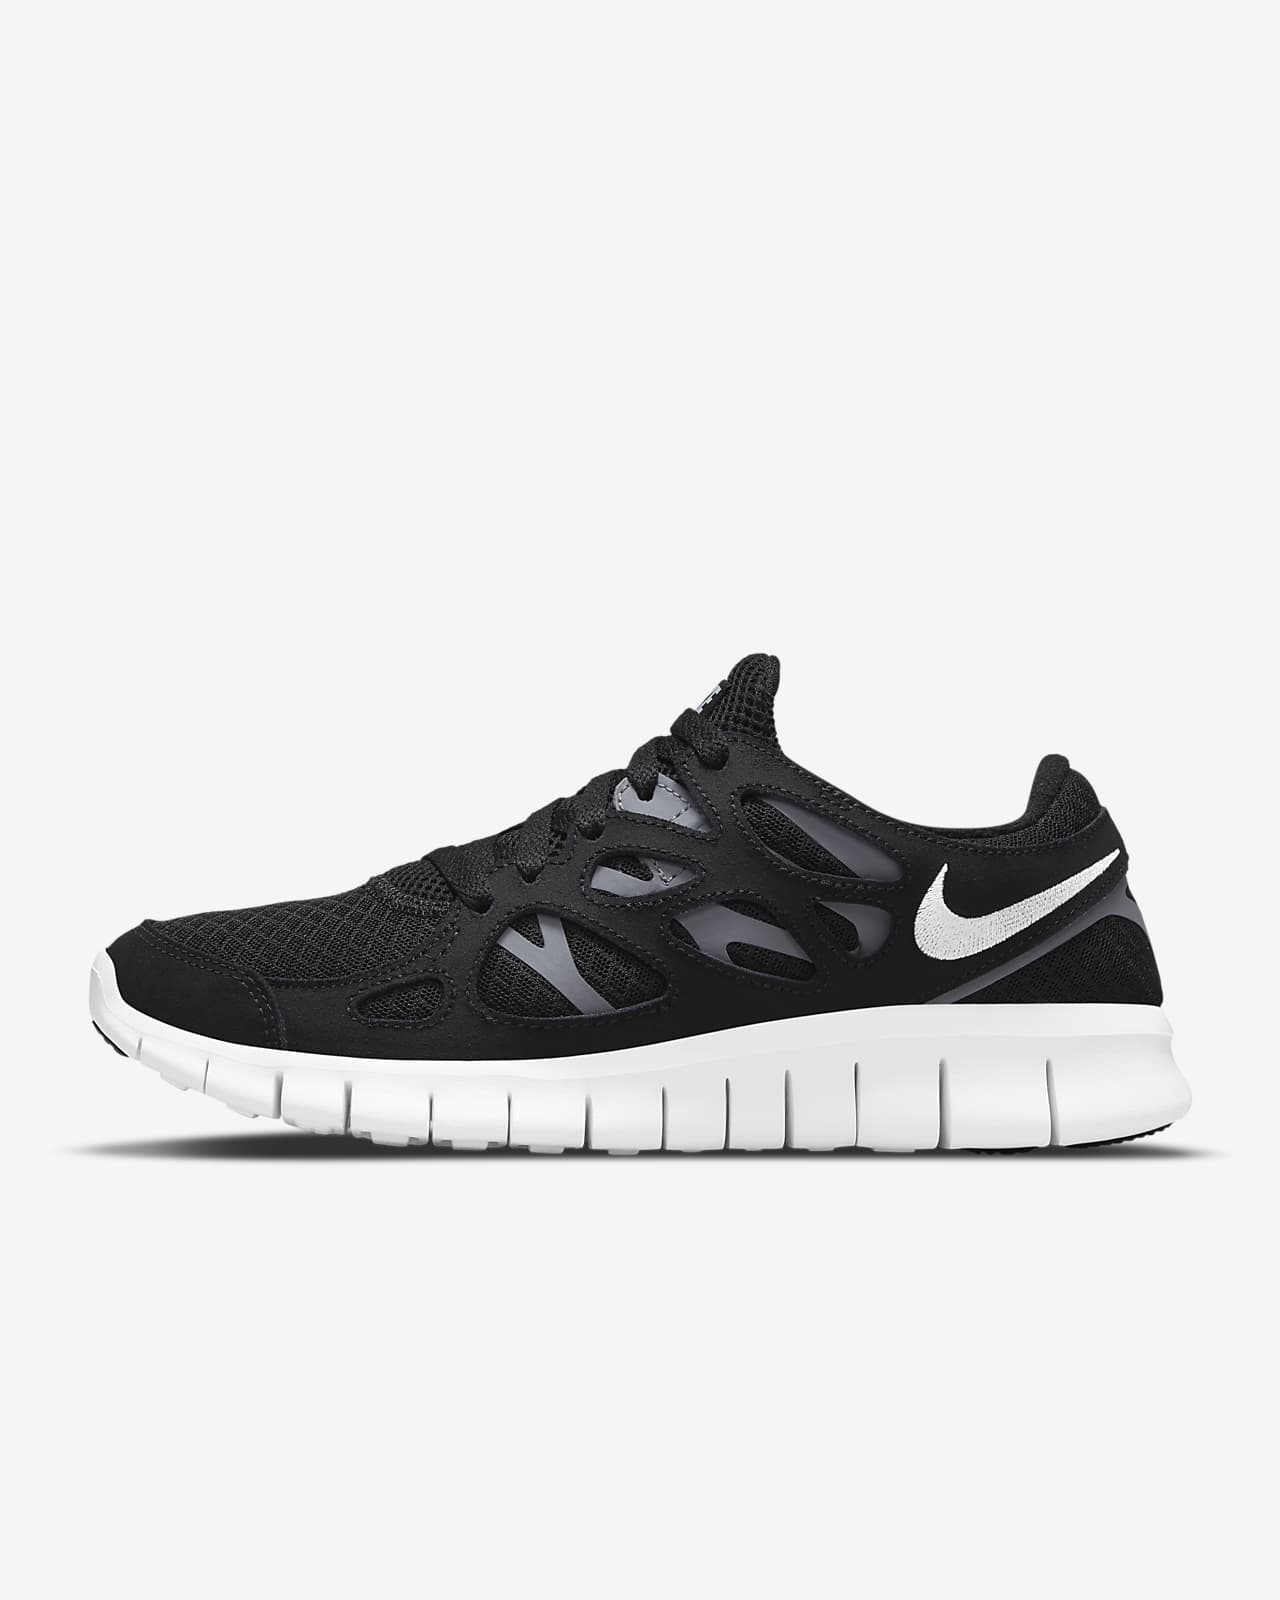 Similar The other day alignment Nike Free Run 2 Women's Shoes. Nike.com